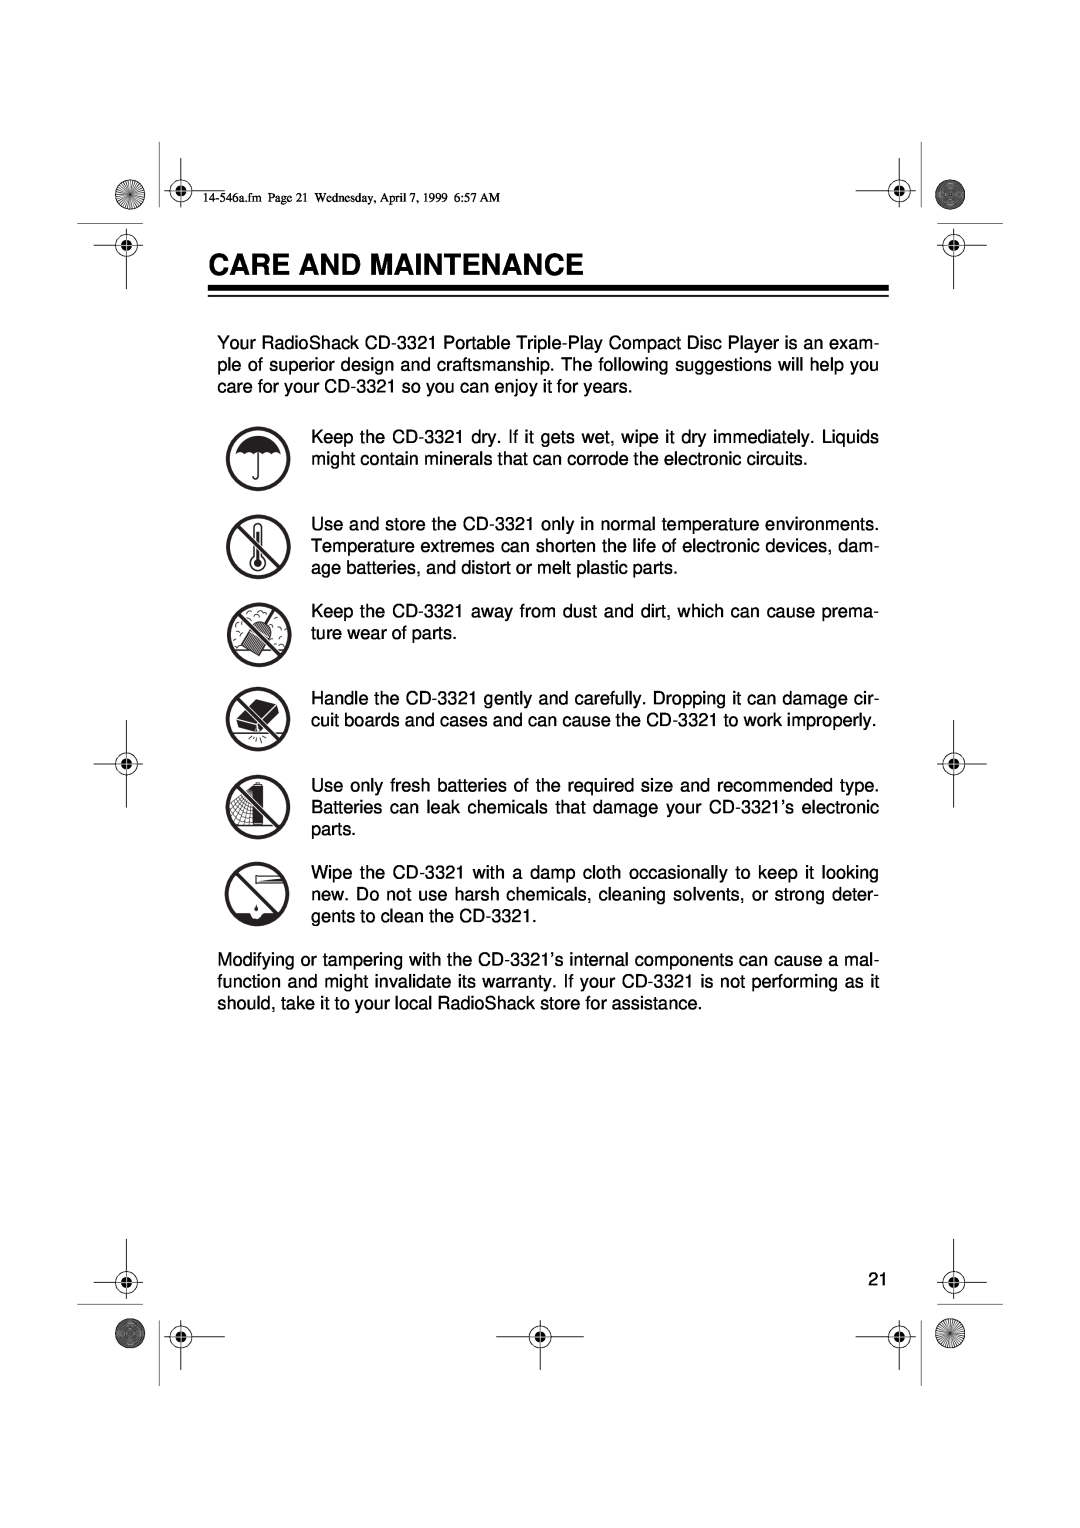 Optimus CD-3321, 14-546A owner manual Care And Maintenance 